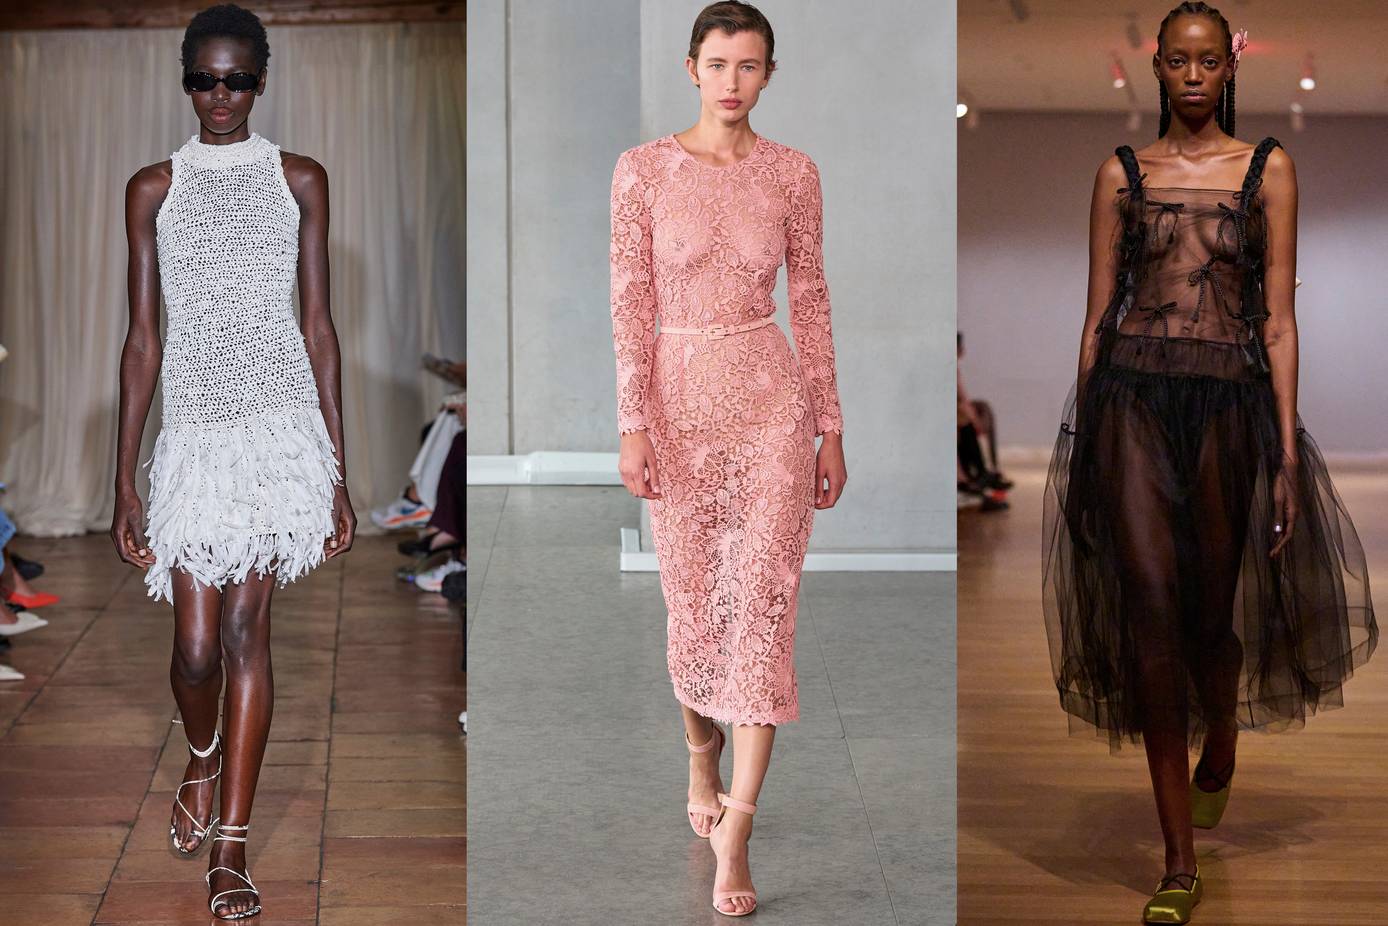 Sheer Pieces Are Trending—21 Items to Get the Look